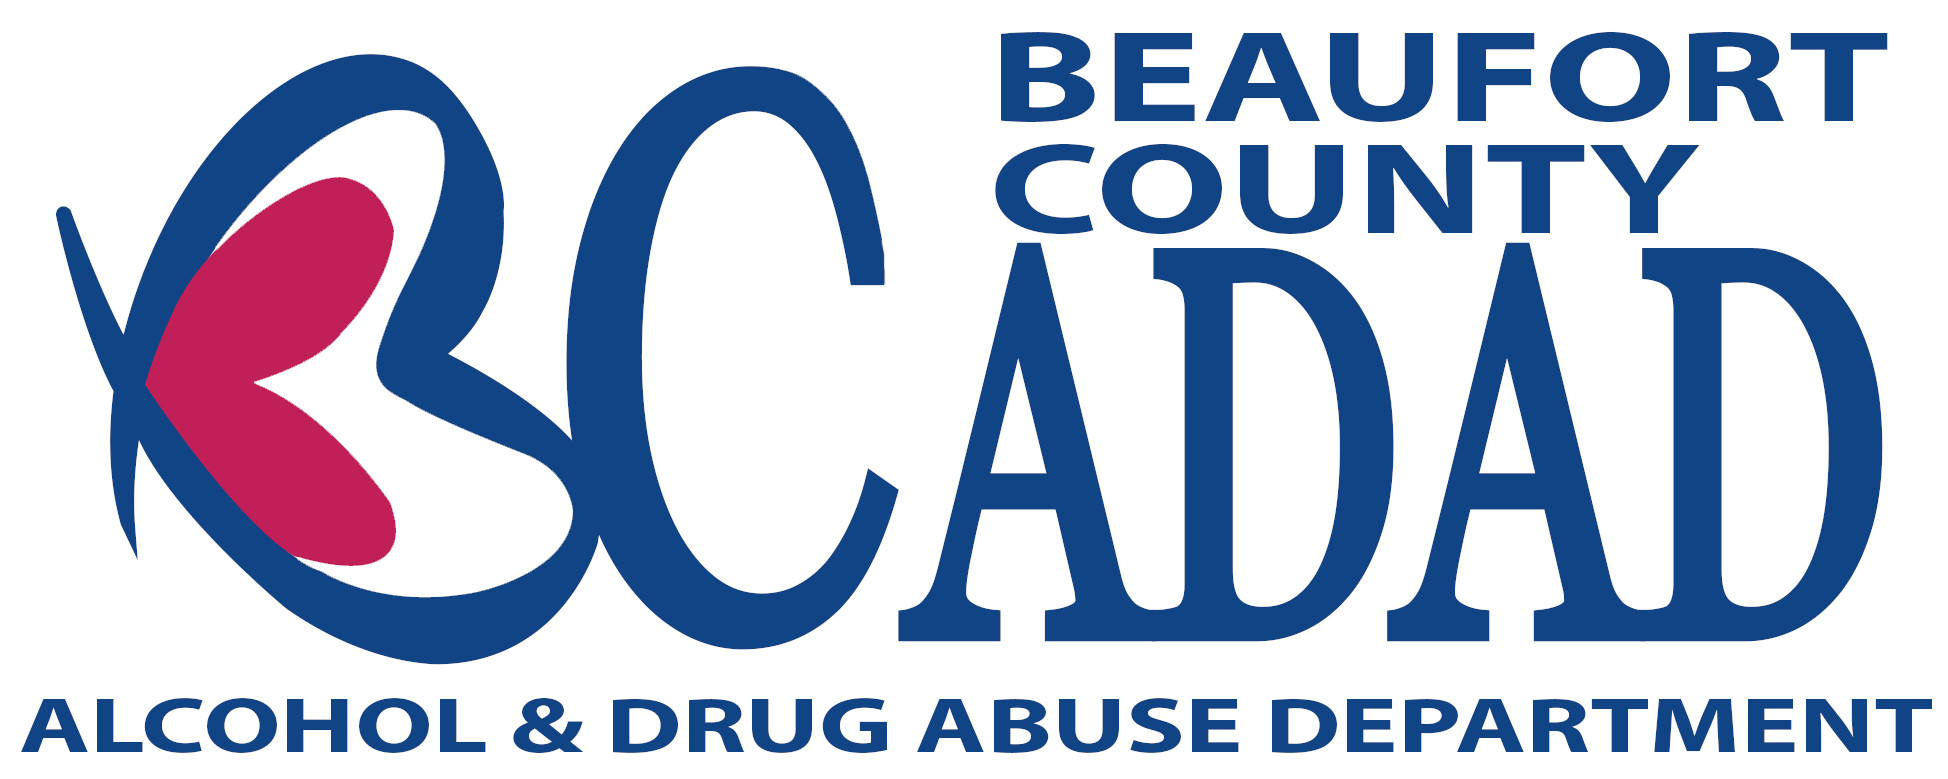 Beaufort County Alcohol and Drug Abuse Department